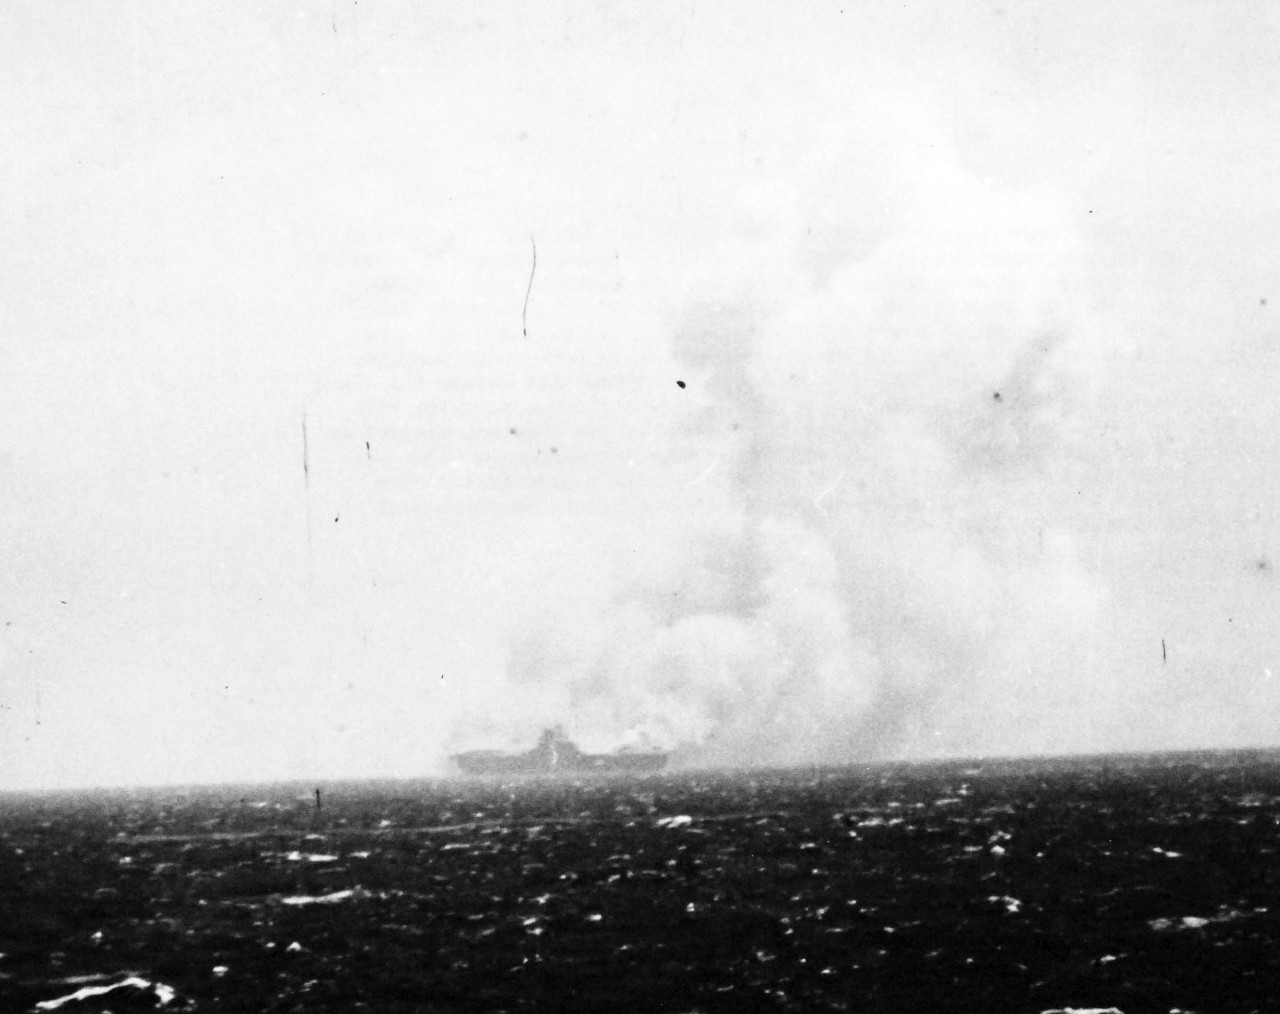 80-G-16350:   Loss of USS Wasp (CV 7), 15 September 1942.    Sinking of USS Wasp (CV 7) after being torpedoed by Japanese submarine I-19 on 15 September 1942.  She was engaged in covering the movement of supplies and reinforcements into Guadalcanal Island.   Photograph released on 27 October 1942.  (2014/06/12).